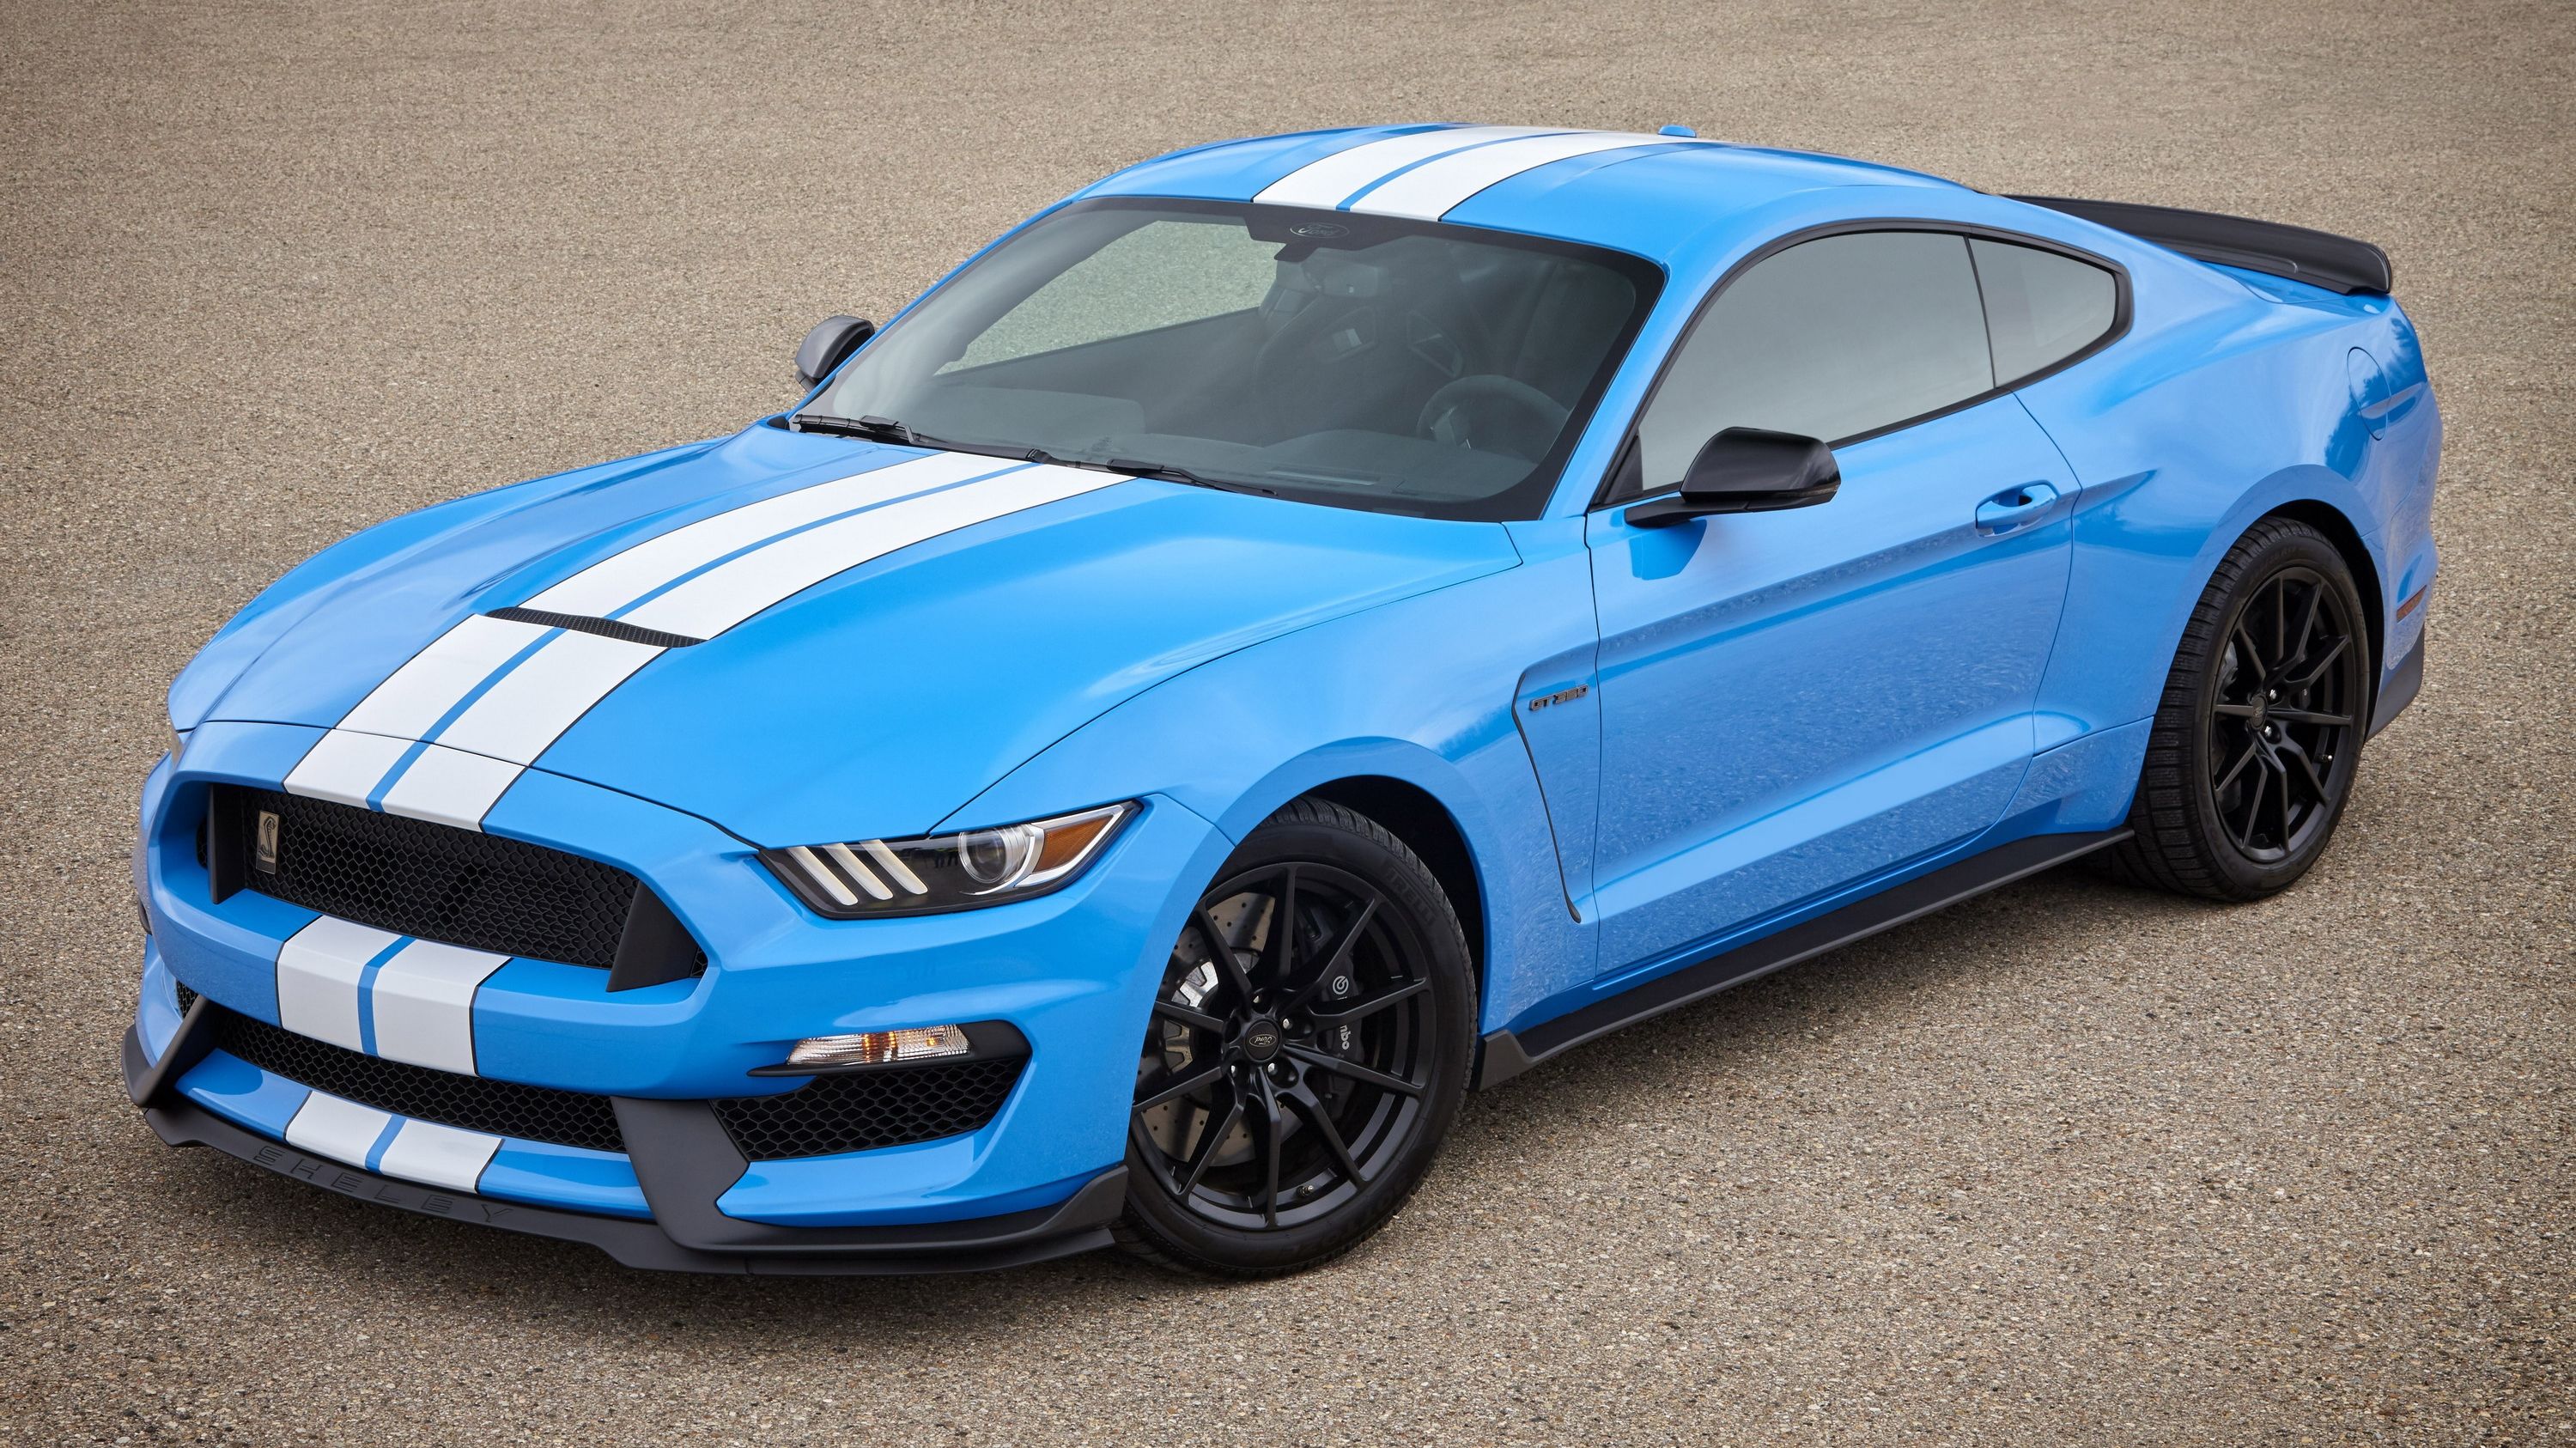 2017 Ford Mustang Shelby GT350 Could Get Dual-Clutch Automatic